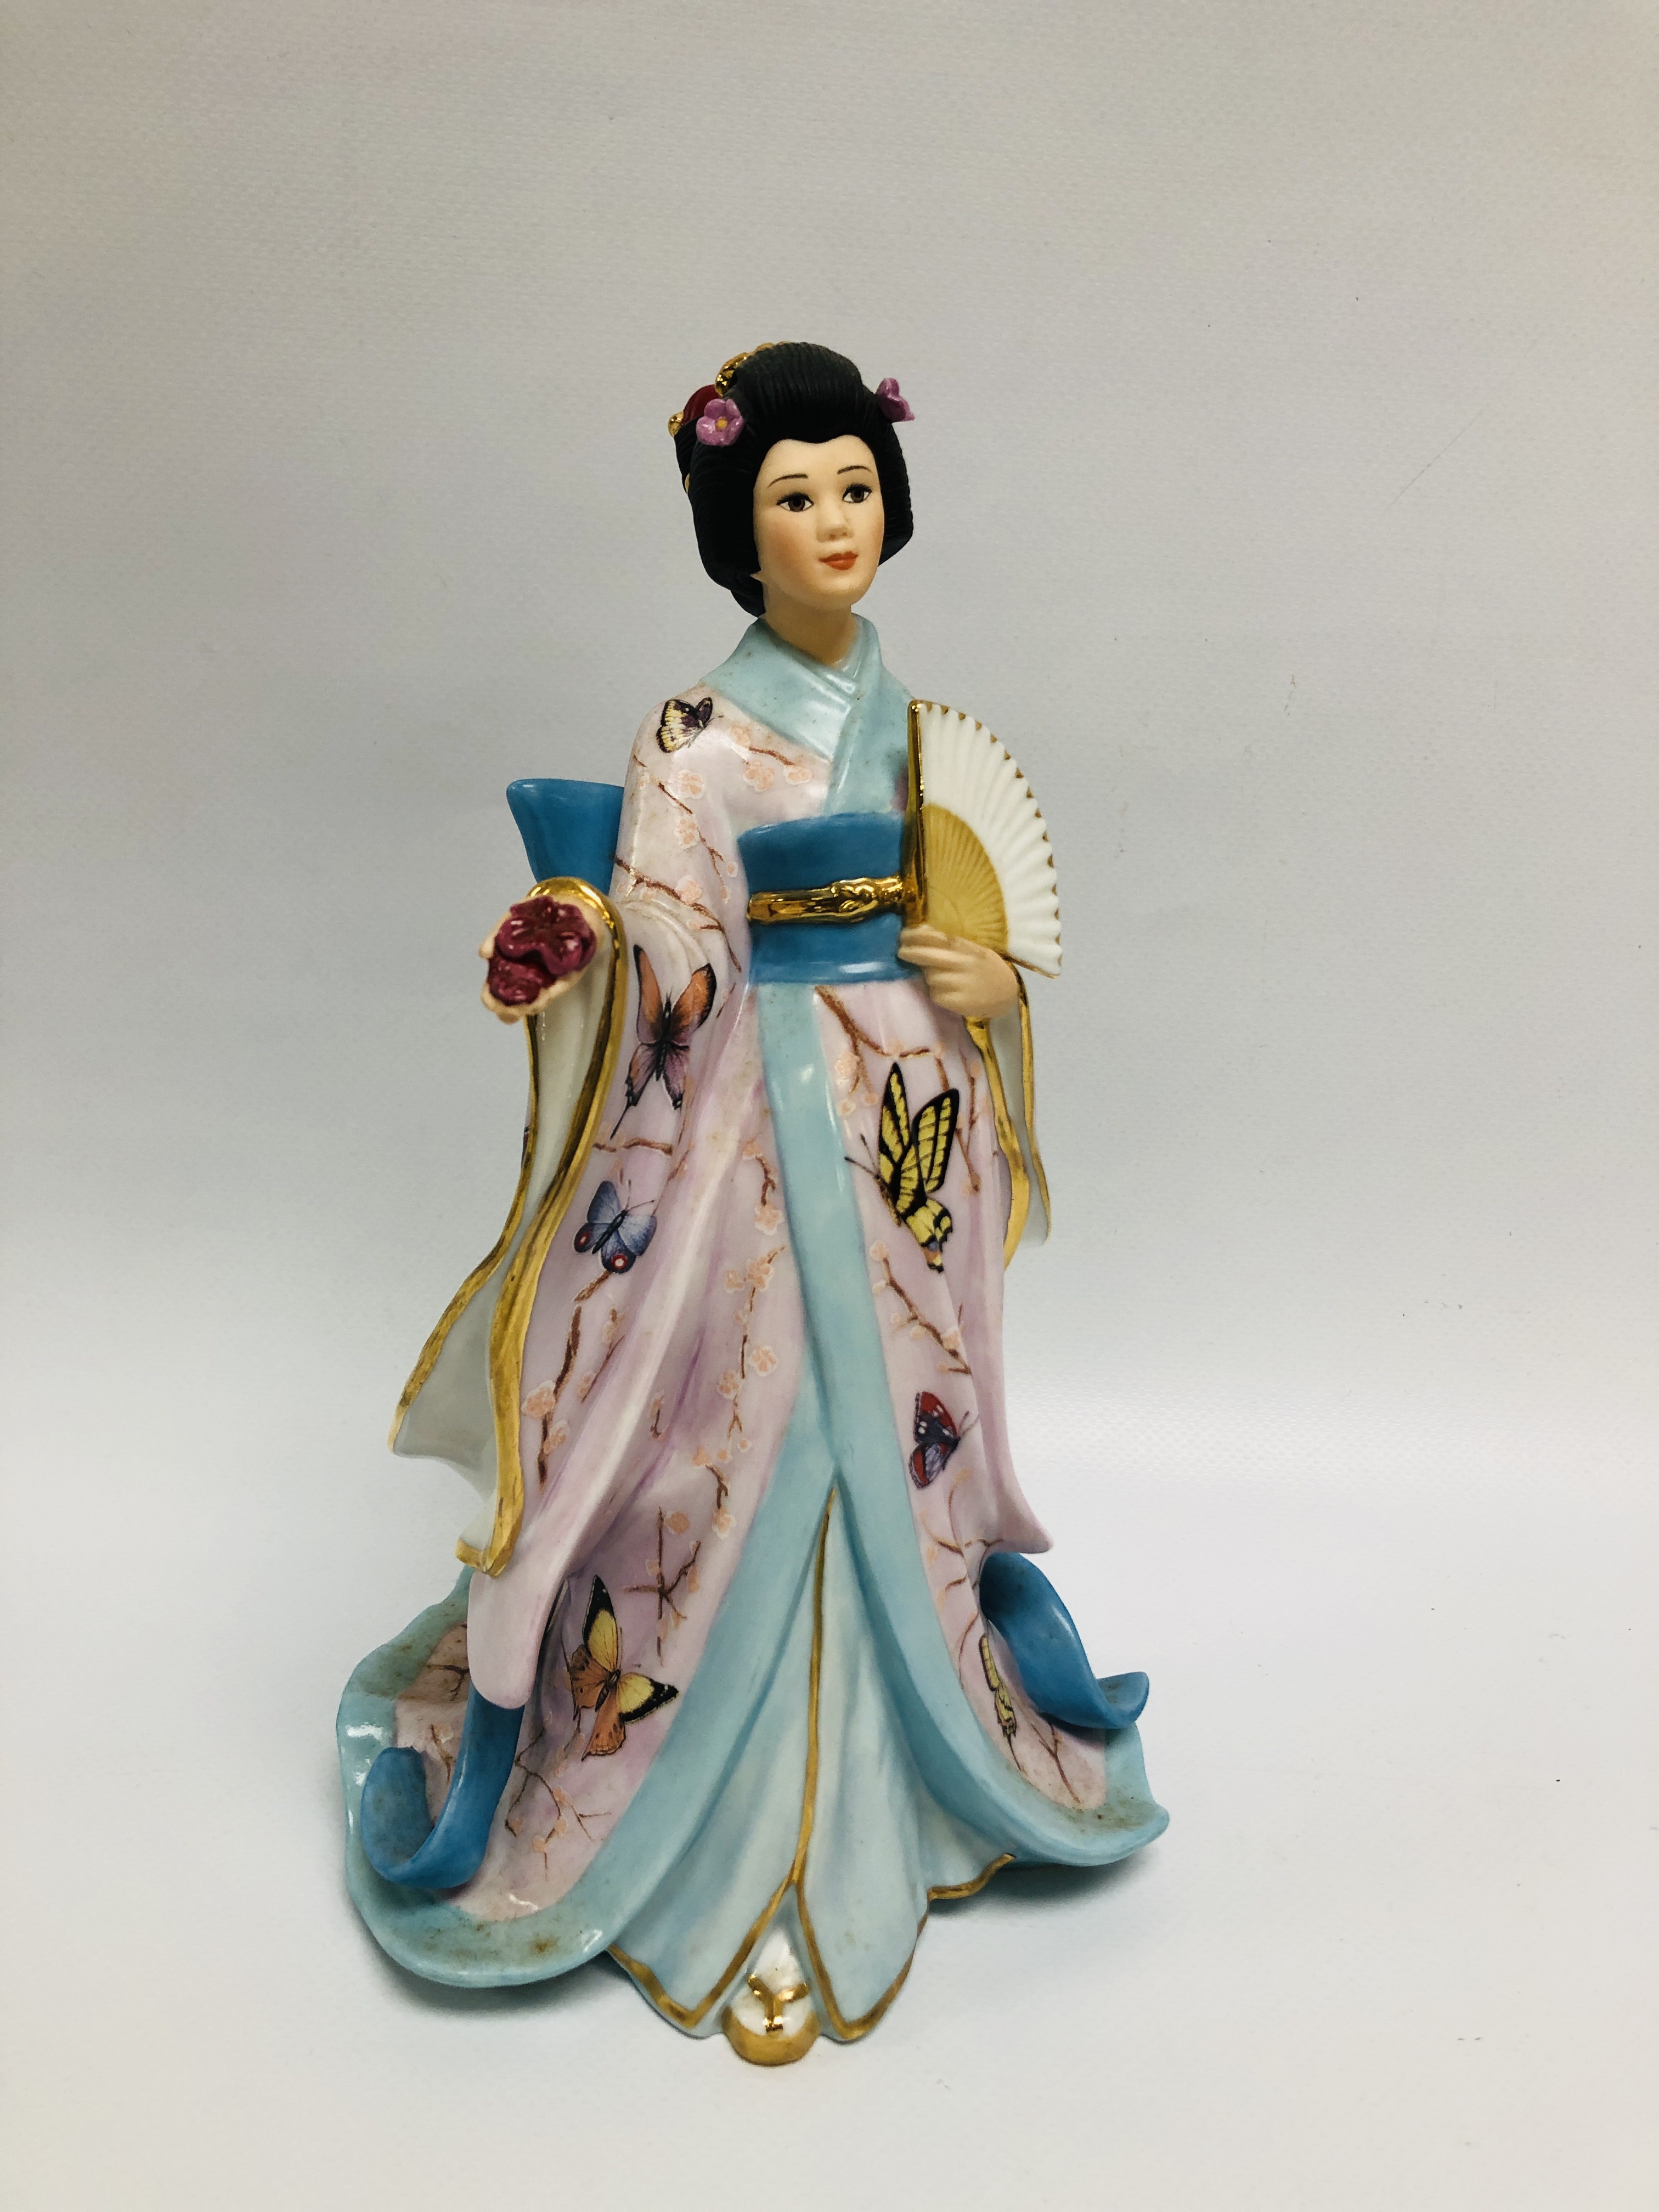 4 X DANBURY MINT COLLECTOR'S FIGURES TO INCLUDE 3 FROM THE LENA LIU COLLECTION (ROSE PRINCESS, - Image 9 of 12